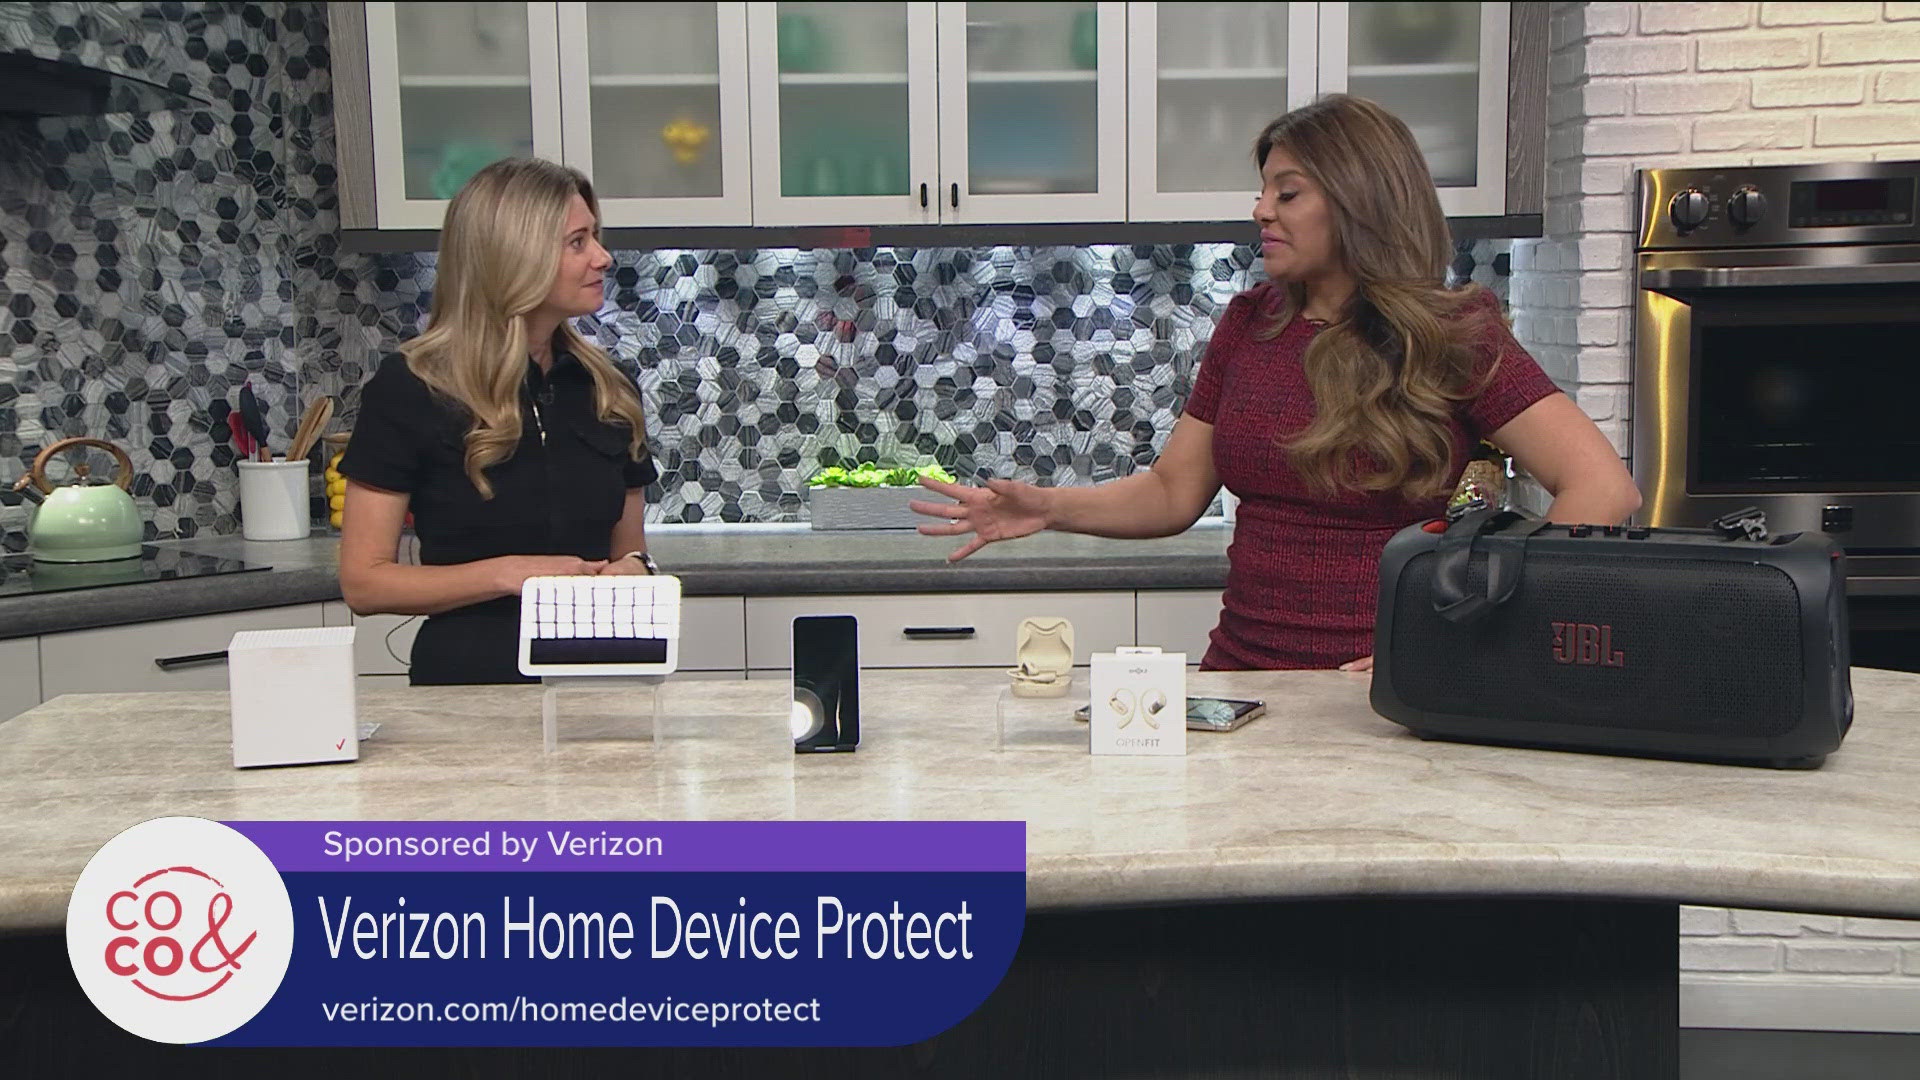 Head to a Verizon Store near you to find out the latest home tech your family will love! Verizon.com/HomeDeviceProtect has more info. **PAID CONTENT**